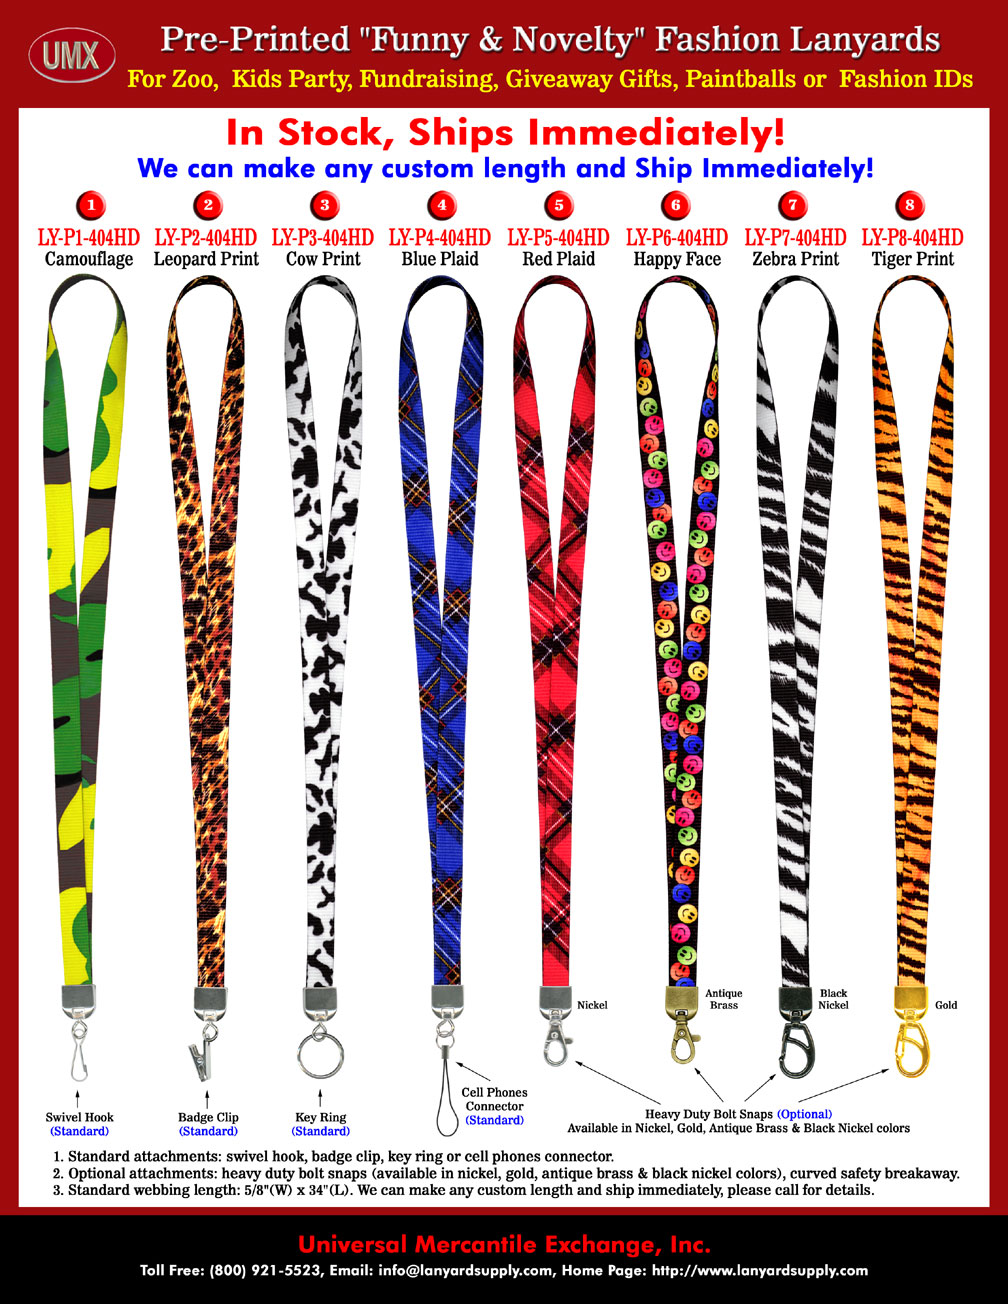 The deluxe personal lanyards or personal carrying straps are unique designs for carrying personal items from lost.